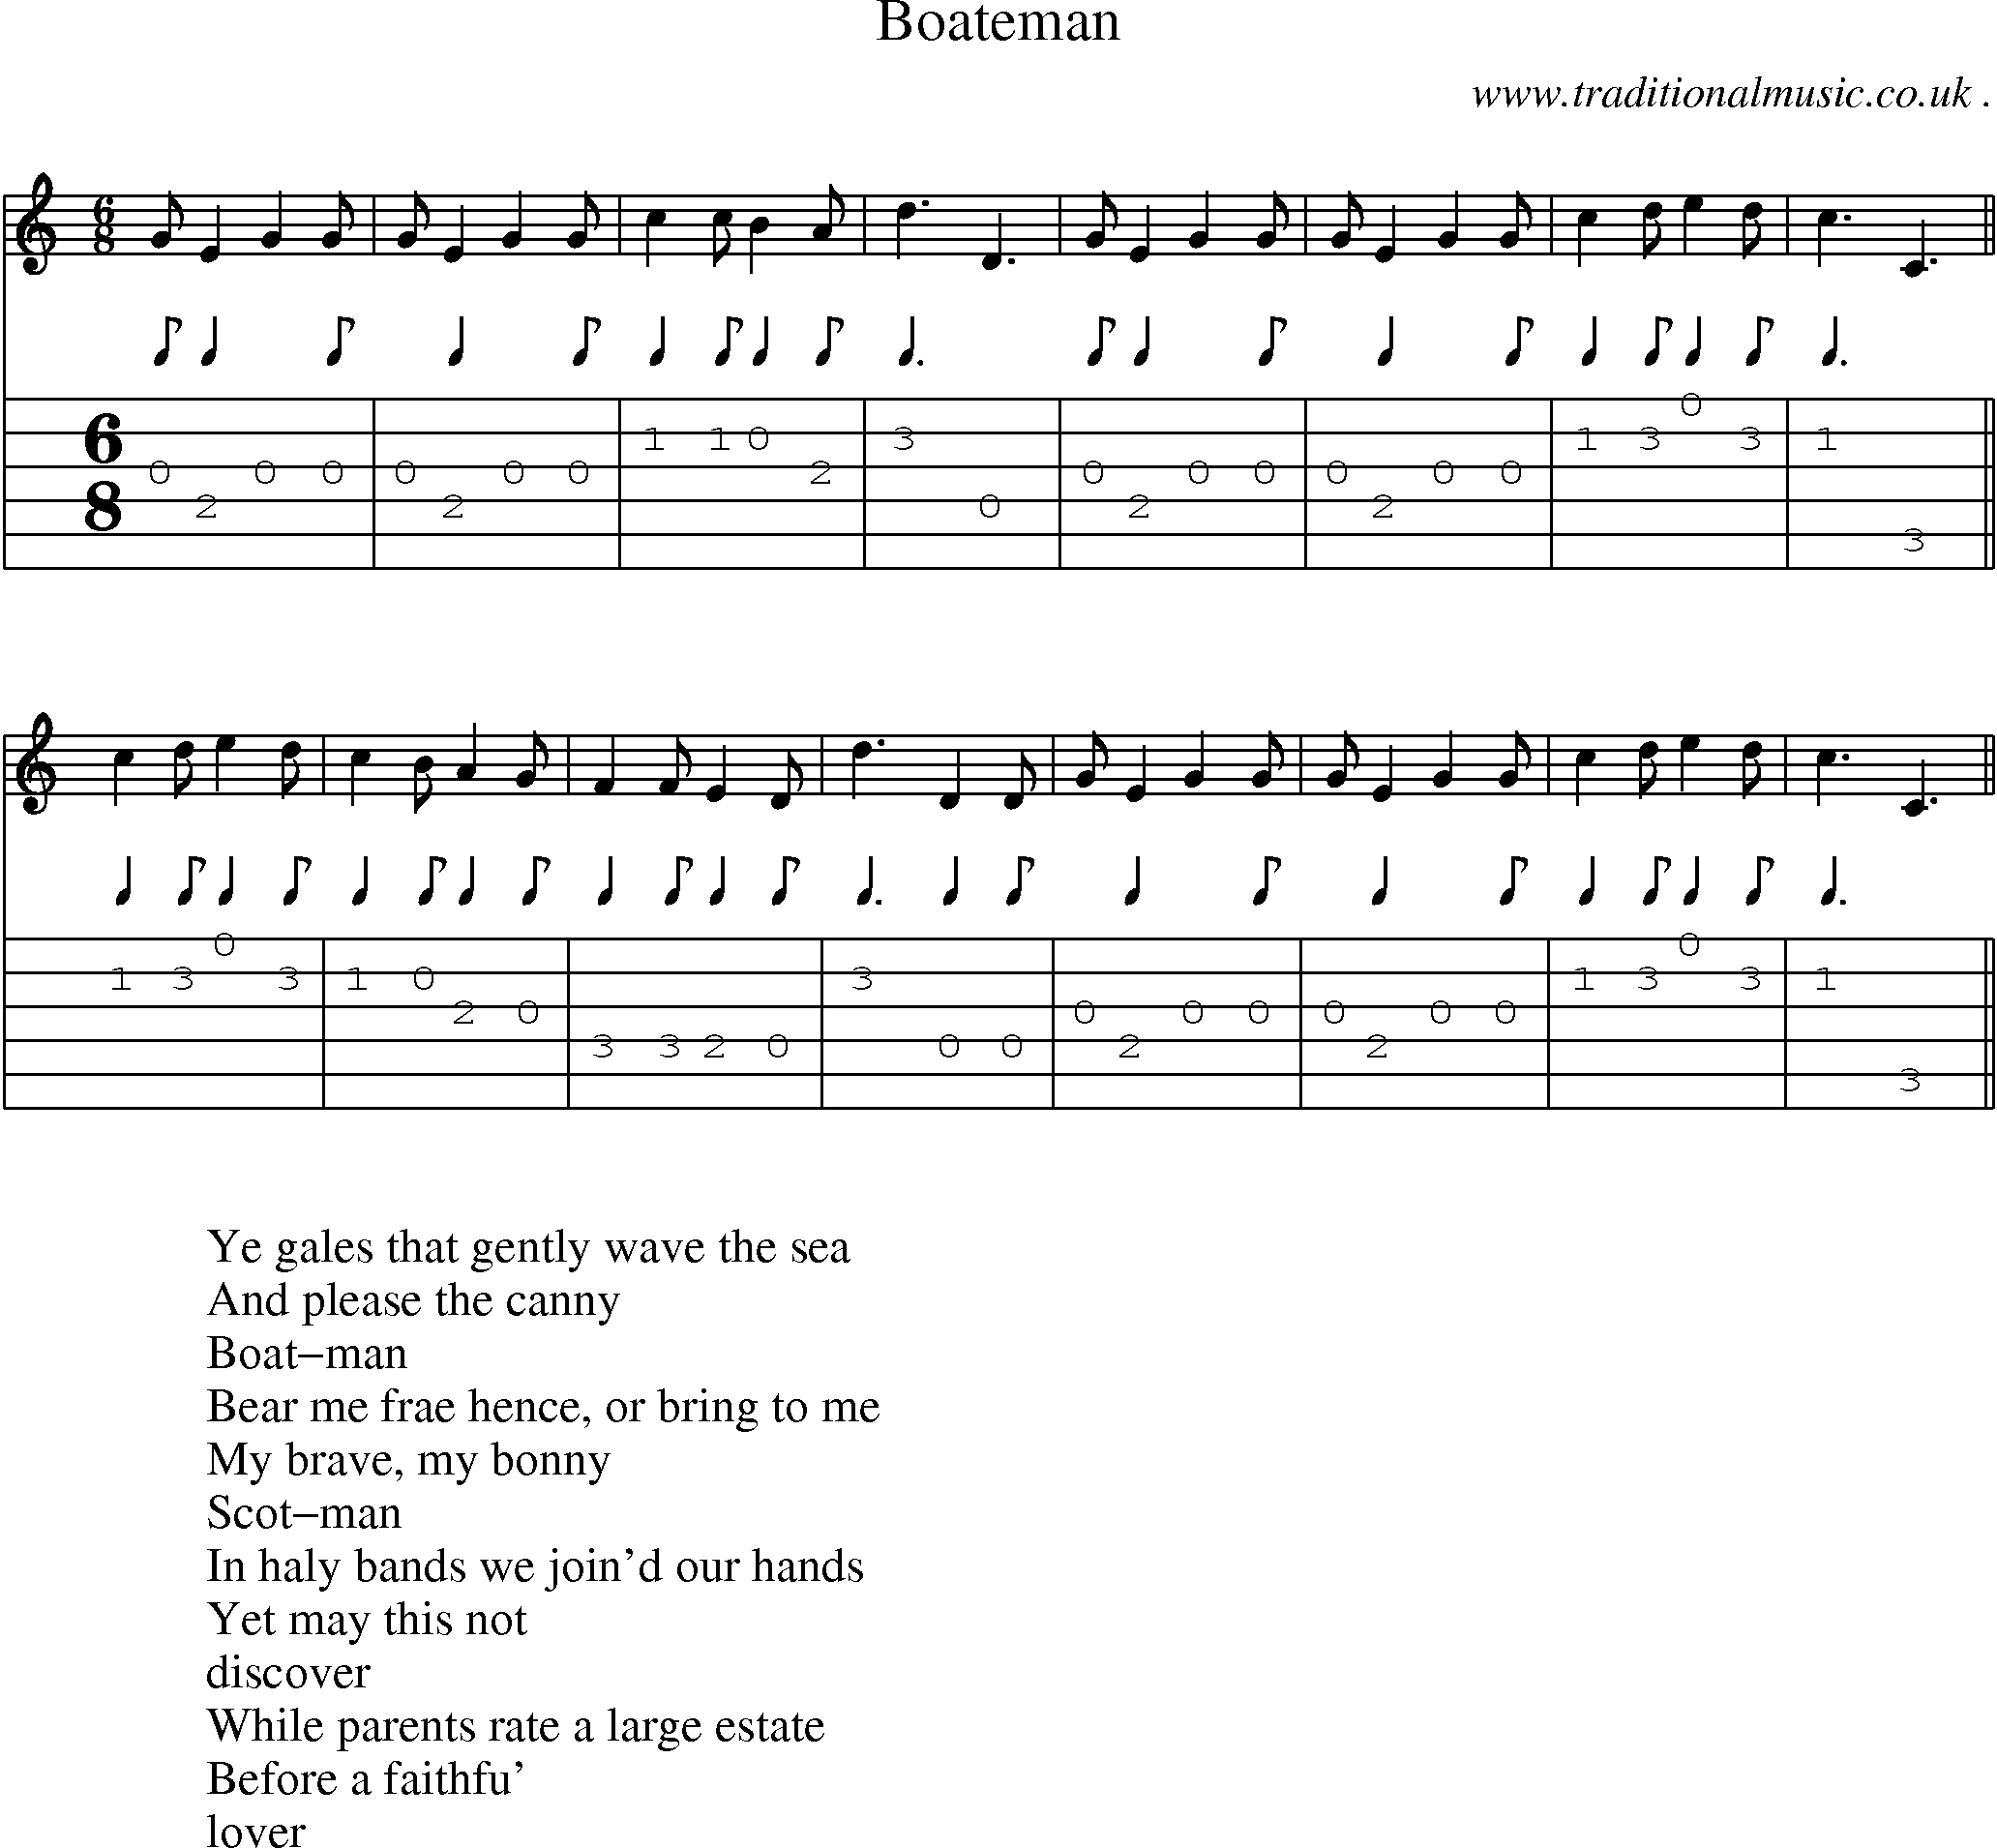 Sheet-Music and Guitar Tabs for Boateman